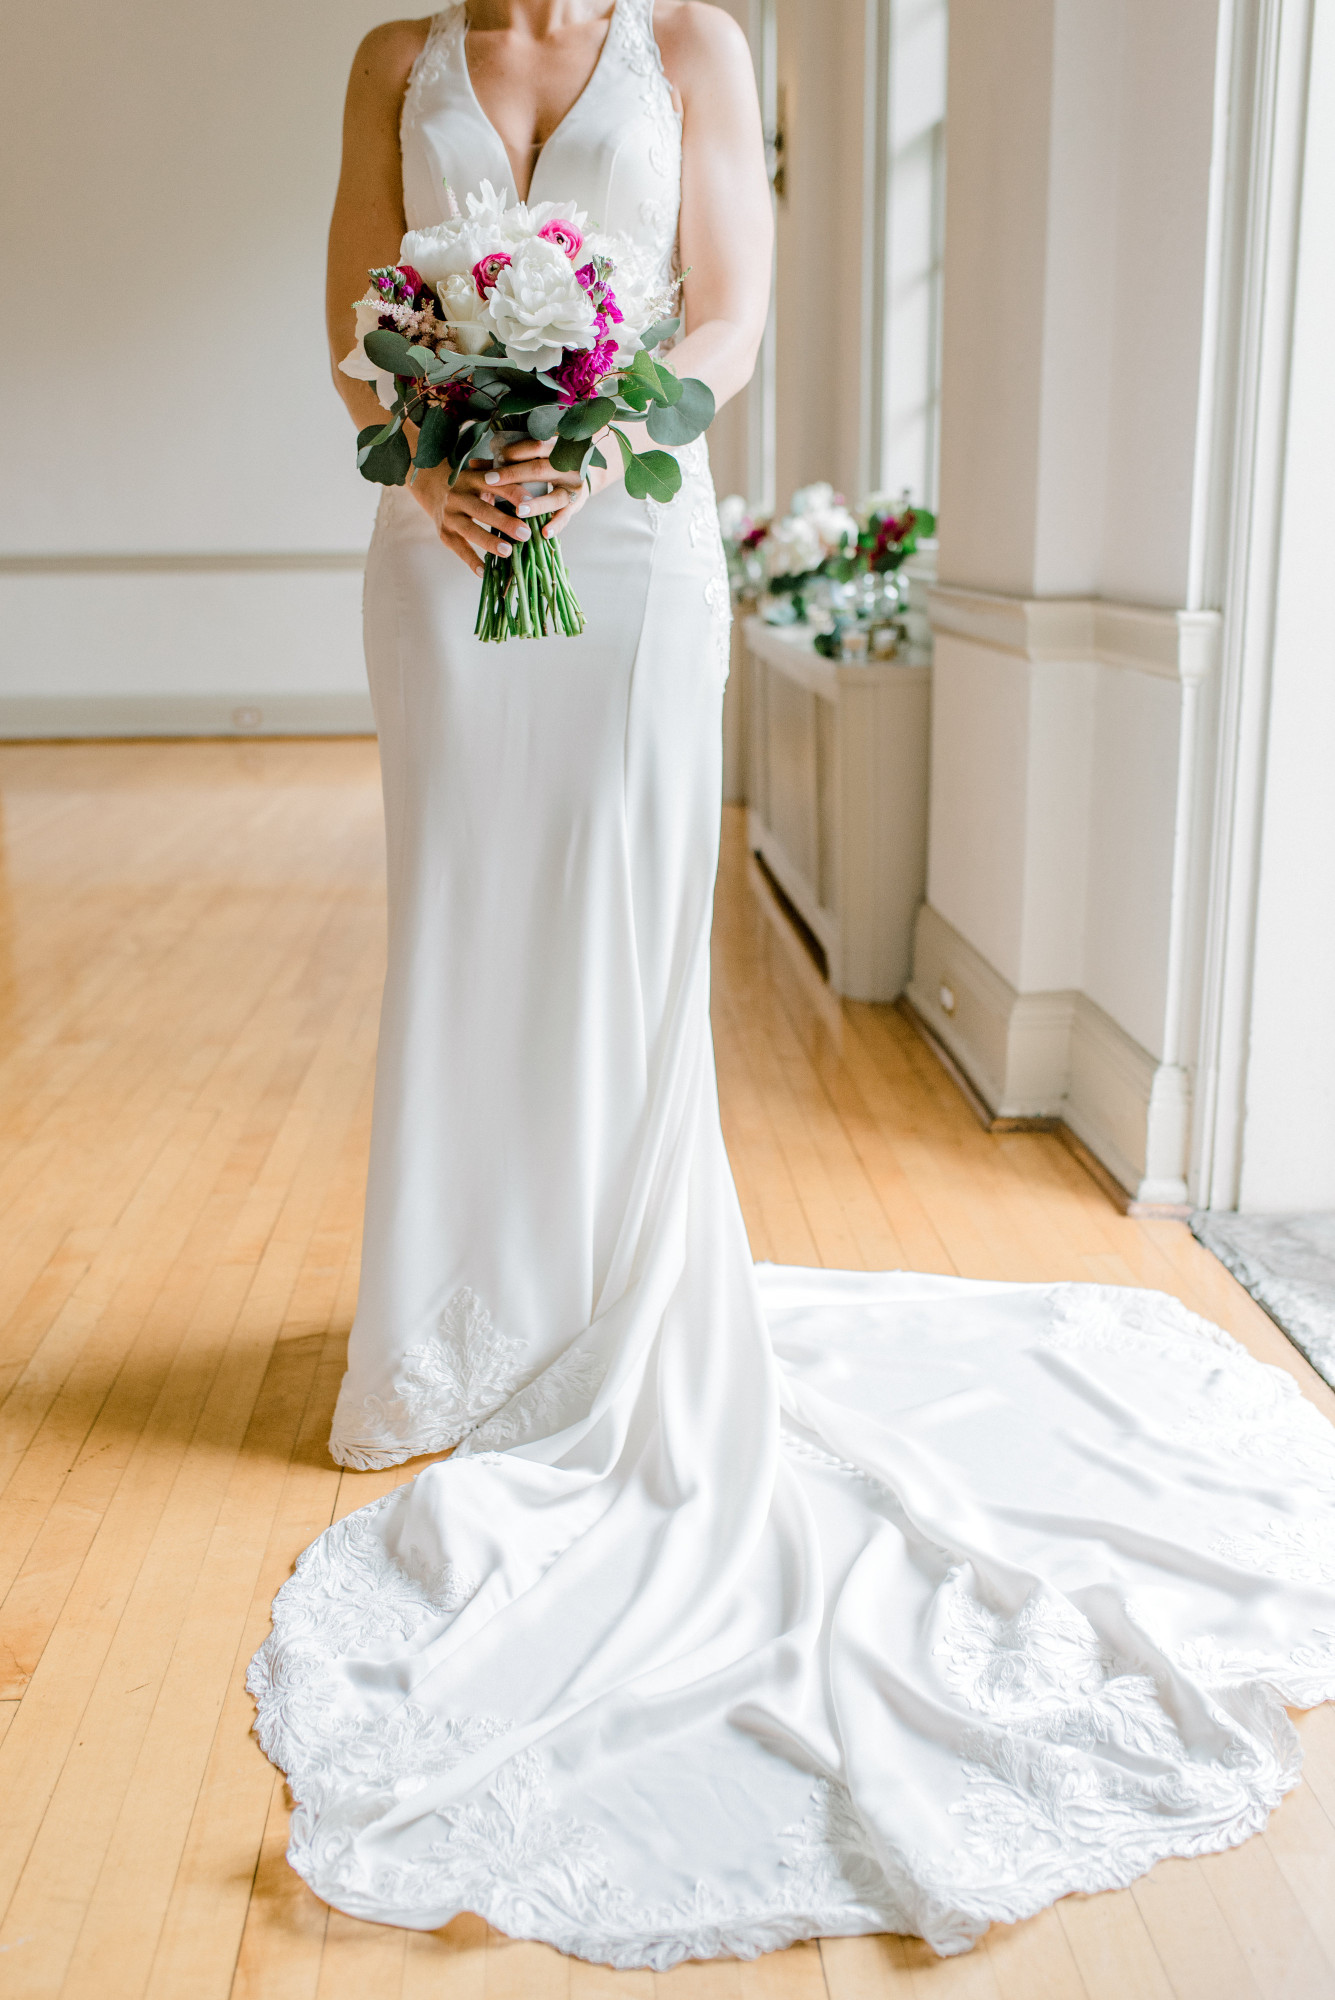 An Intimate Levering Mill Tribute House Pennsylvania Wedding - The Overwhelmed Bride Wedding Blog